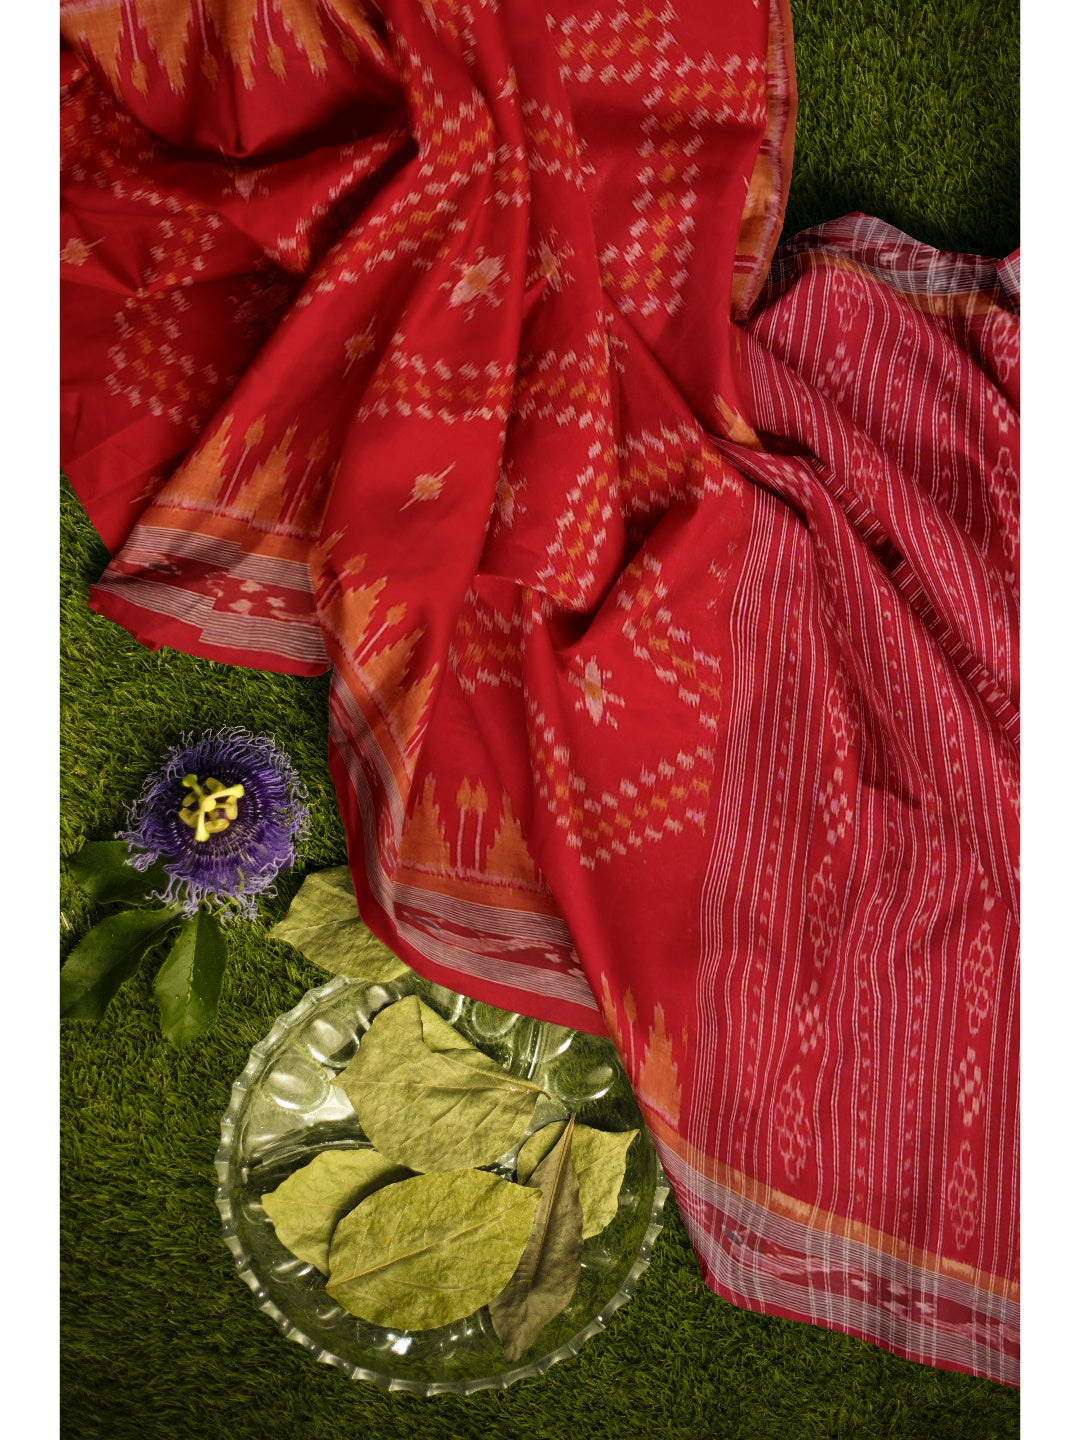 Red Cotton ikat Dupatta with woven motifs